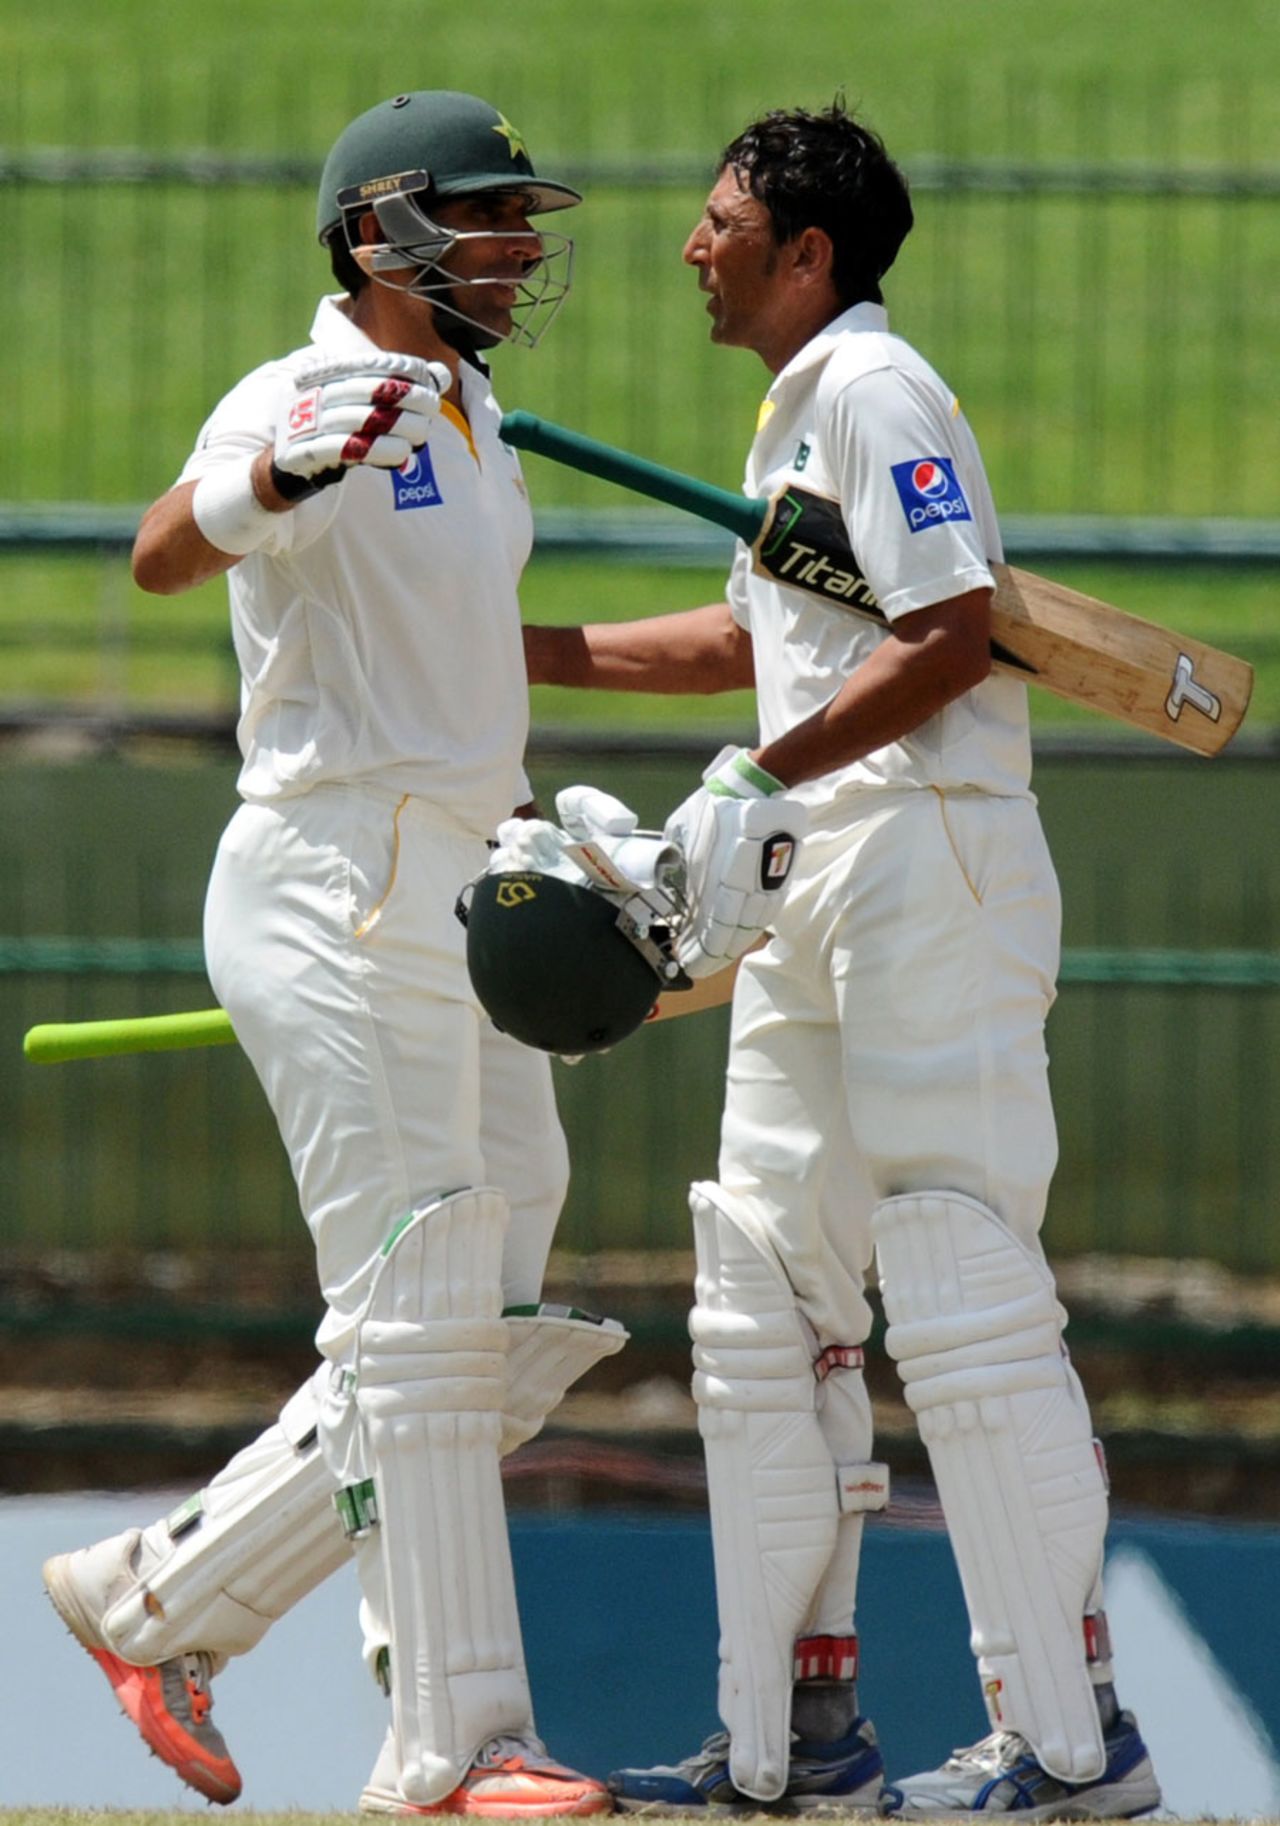 Younis Khan and Misbah-ul-Haq celebrate after Pakistan's record chase, Sri Lanka v Pakistan, 3rd Test, Pallekele, 5th day, July 7, 2015